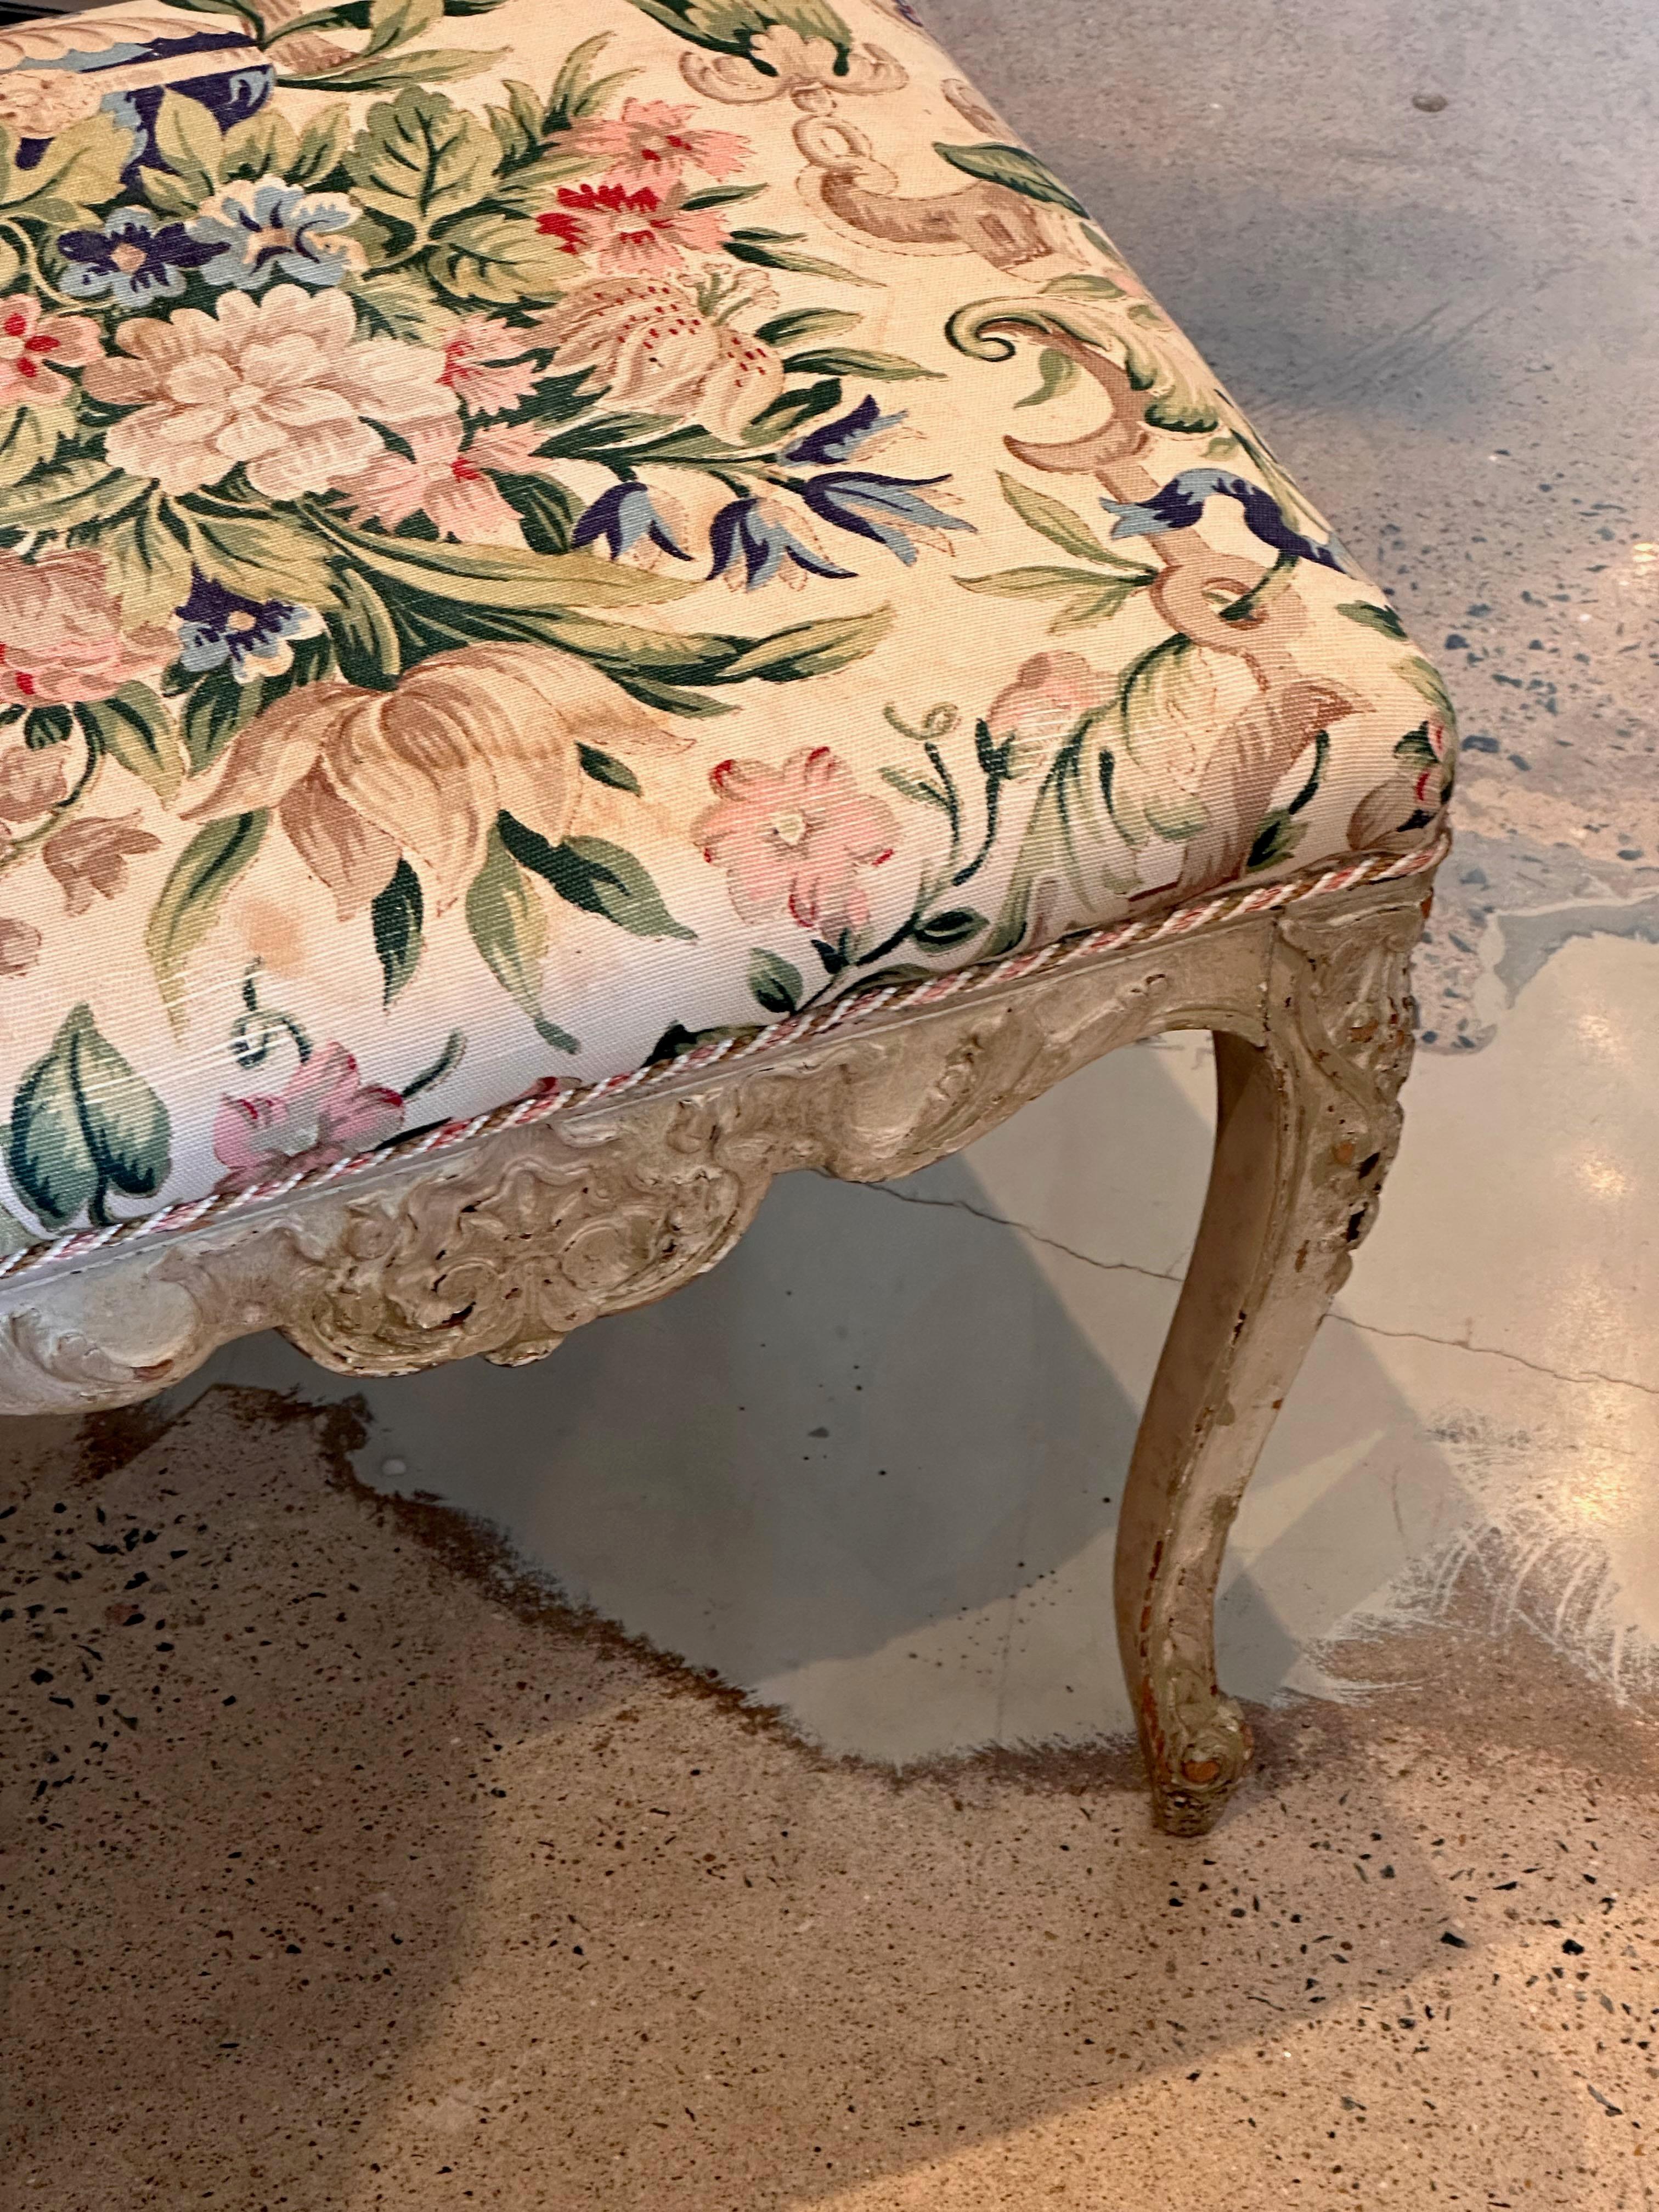 Perch yourself on this beautiful stool. Nicely carved with warm, worn paint. A great seat.